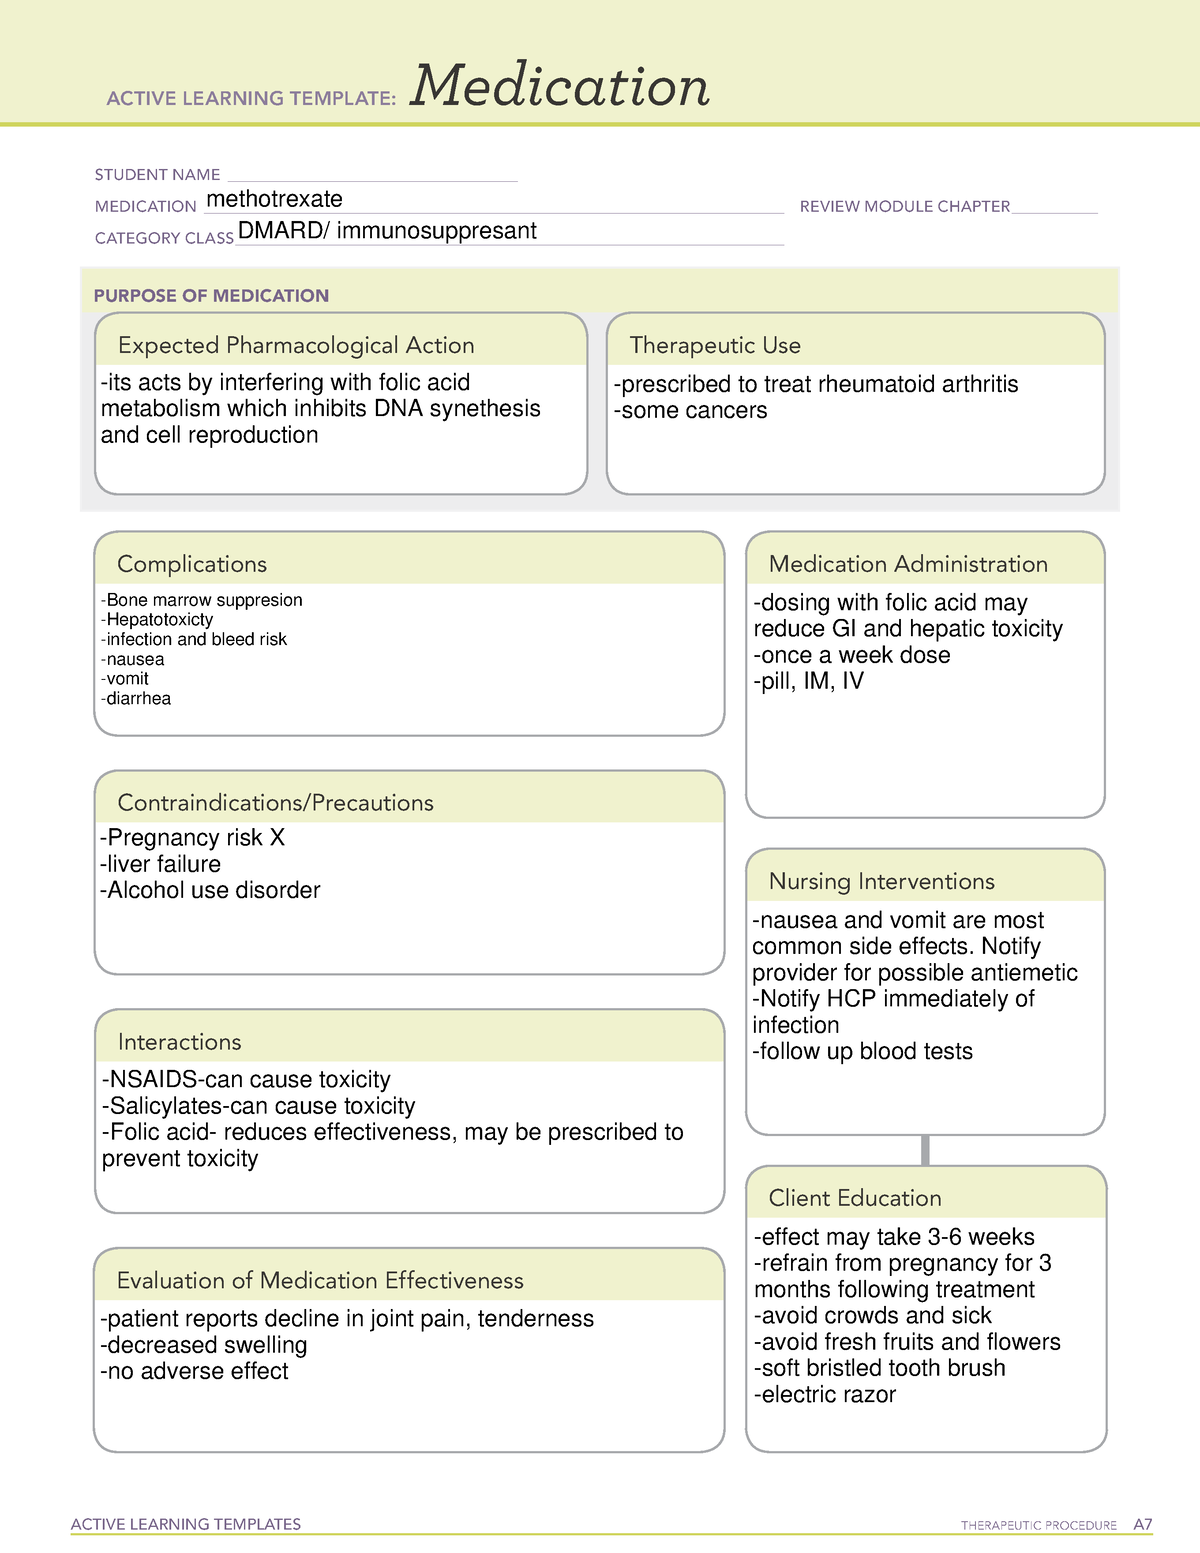 medication methotrexate ACTIVE LEARNING TEMPLATES THERAPEUTIC